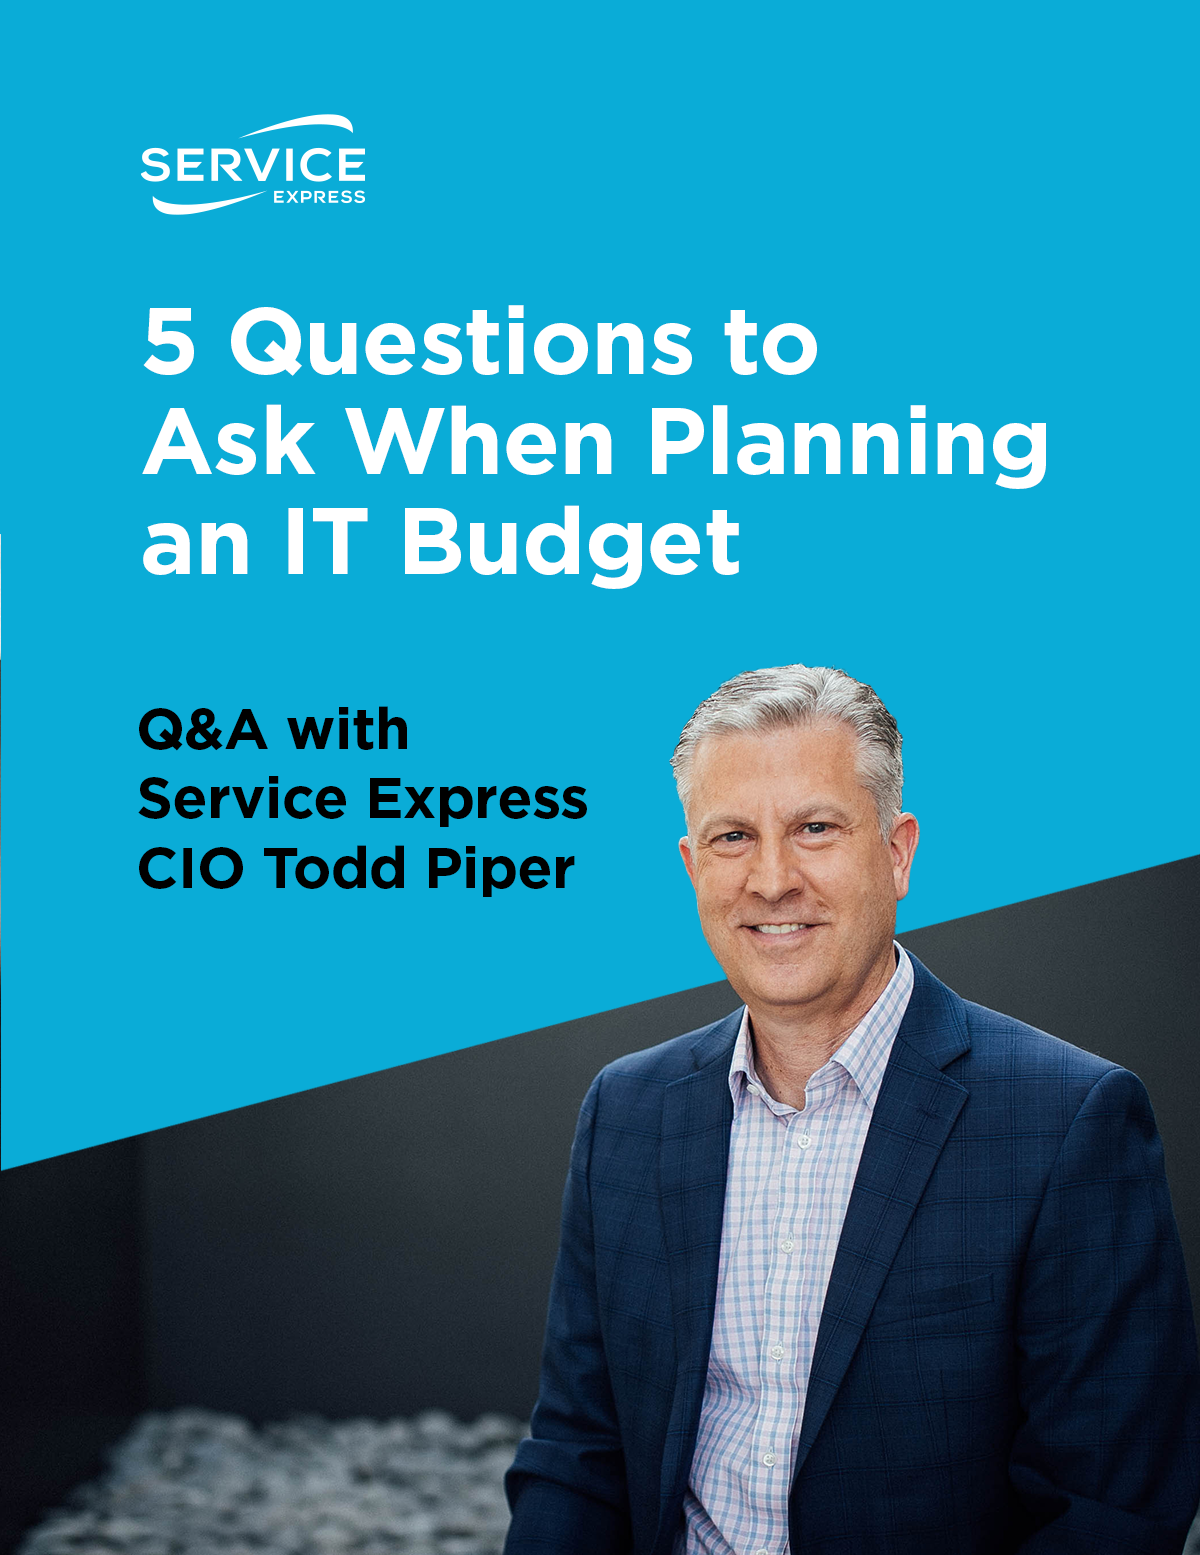 Image for Abstract FY20Q2 PUBS MUST USE - 5 Questions to Ask When Planning Your IT Budget in 2020